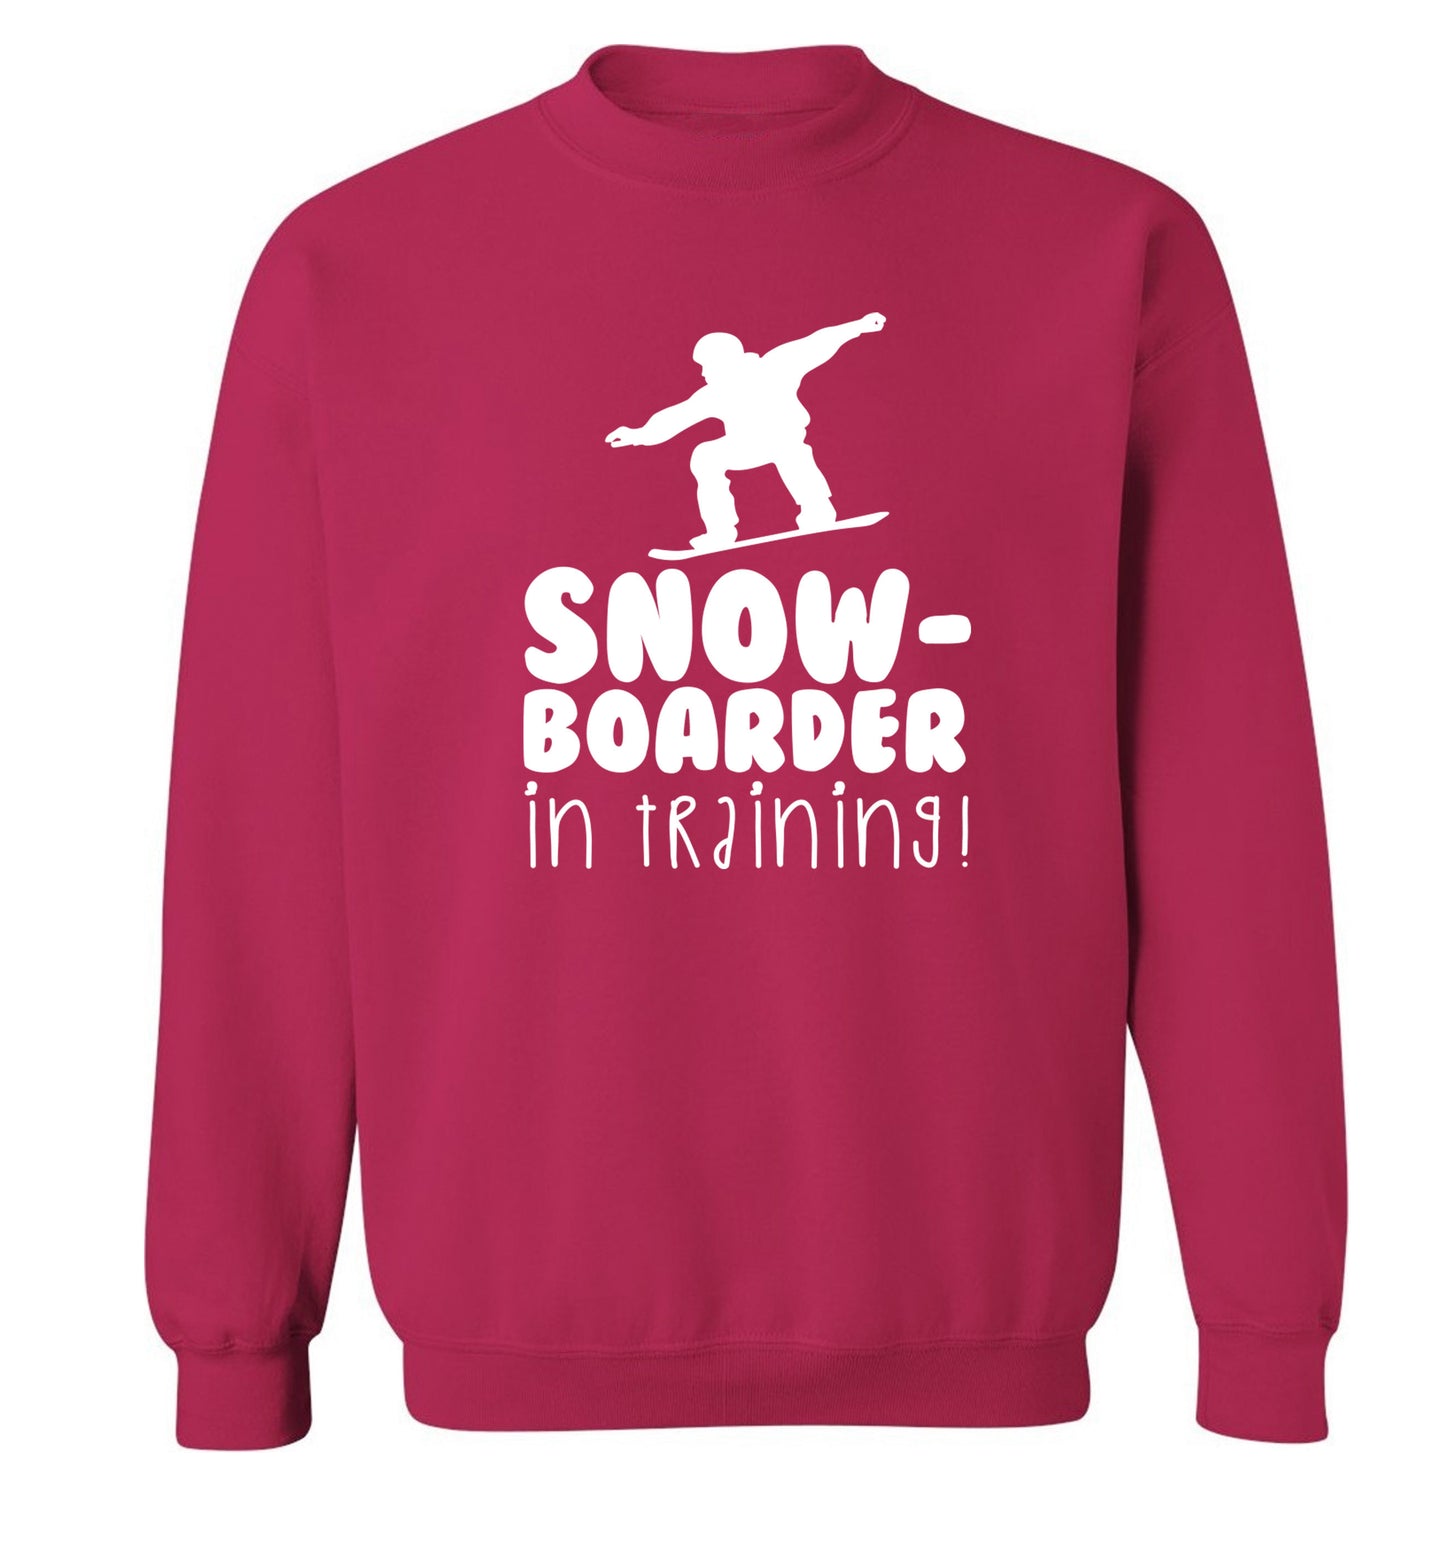 Snowboarder in training Adult's unisex pink Sweater 2XL